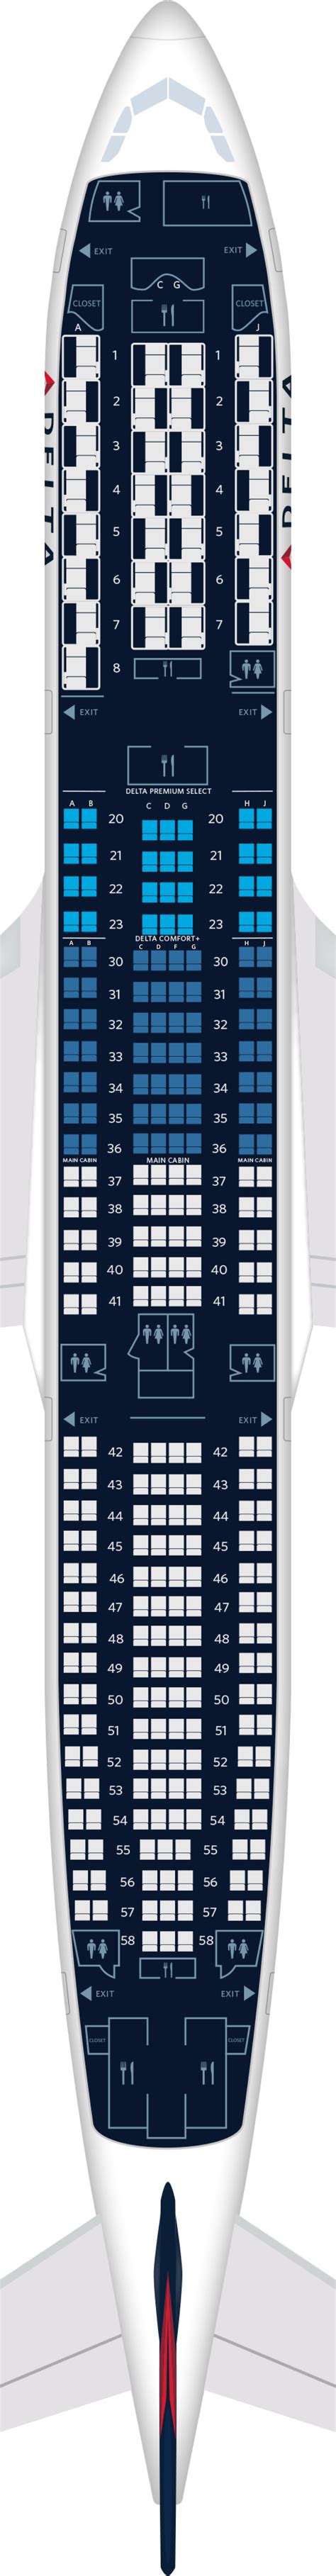 Seat Map Airbus A330 900neo Image To U